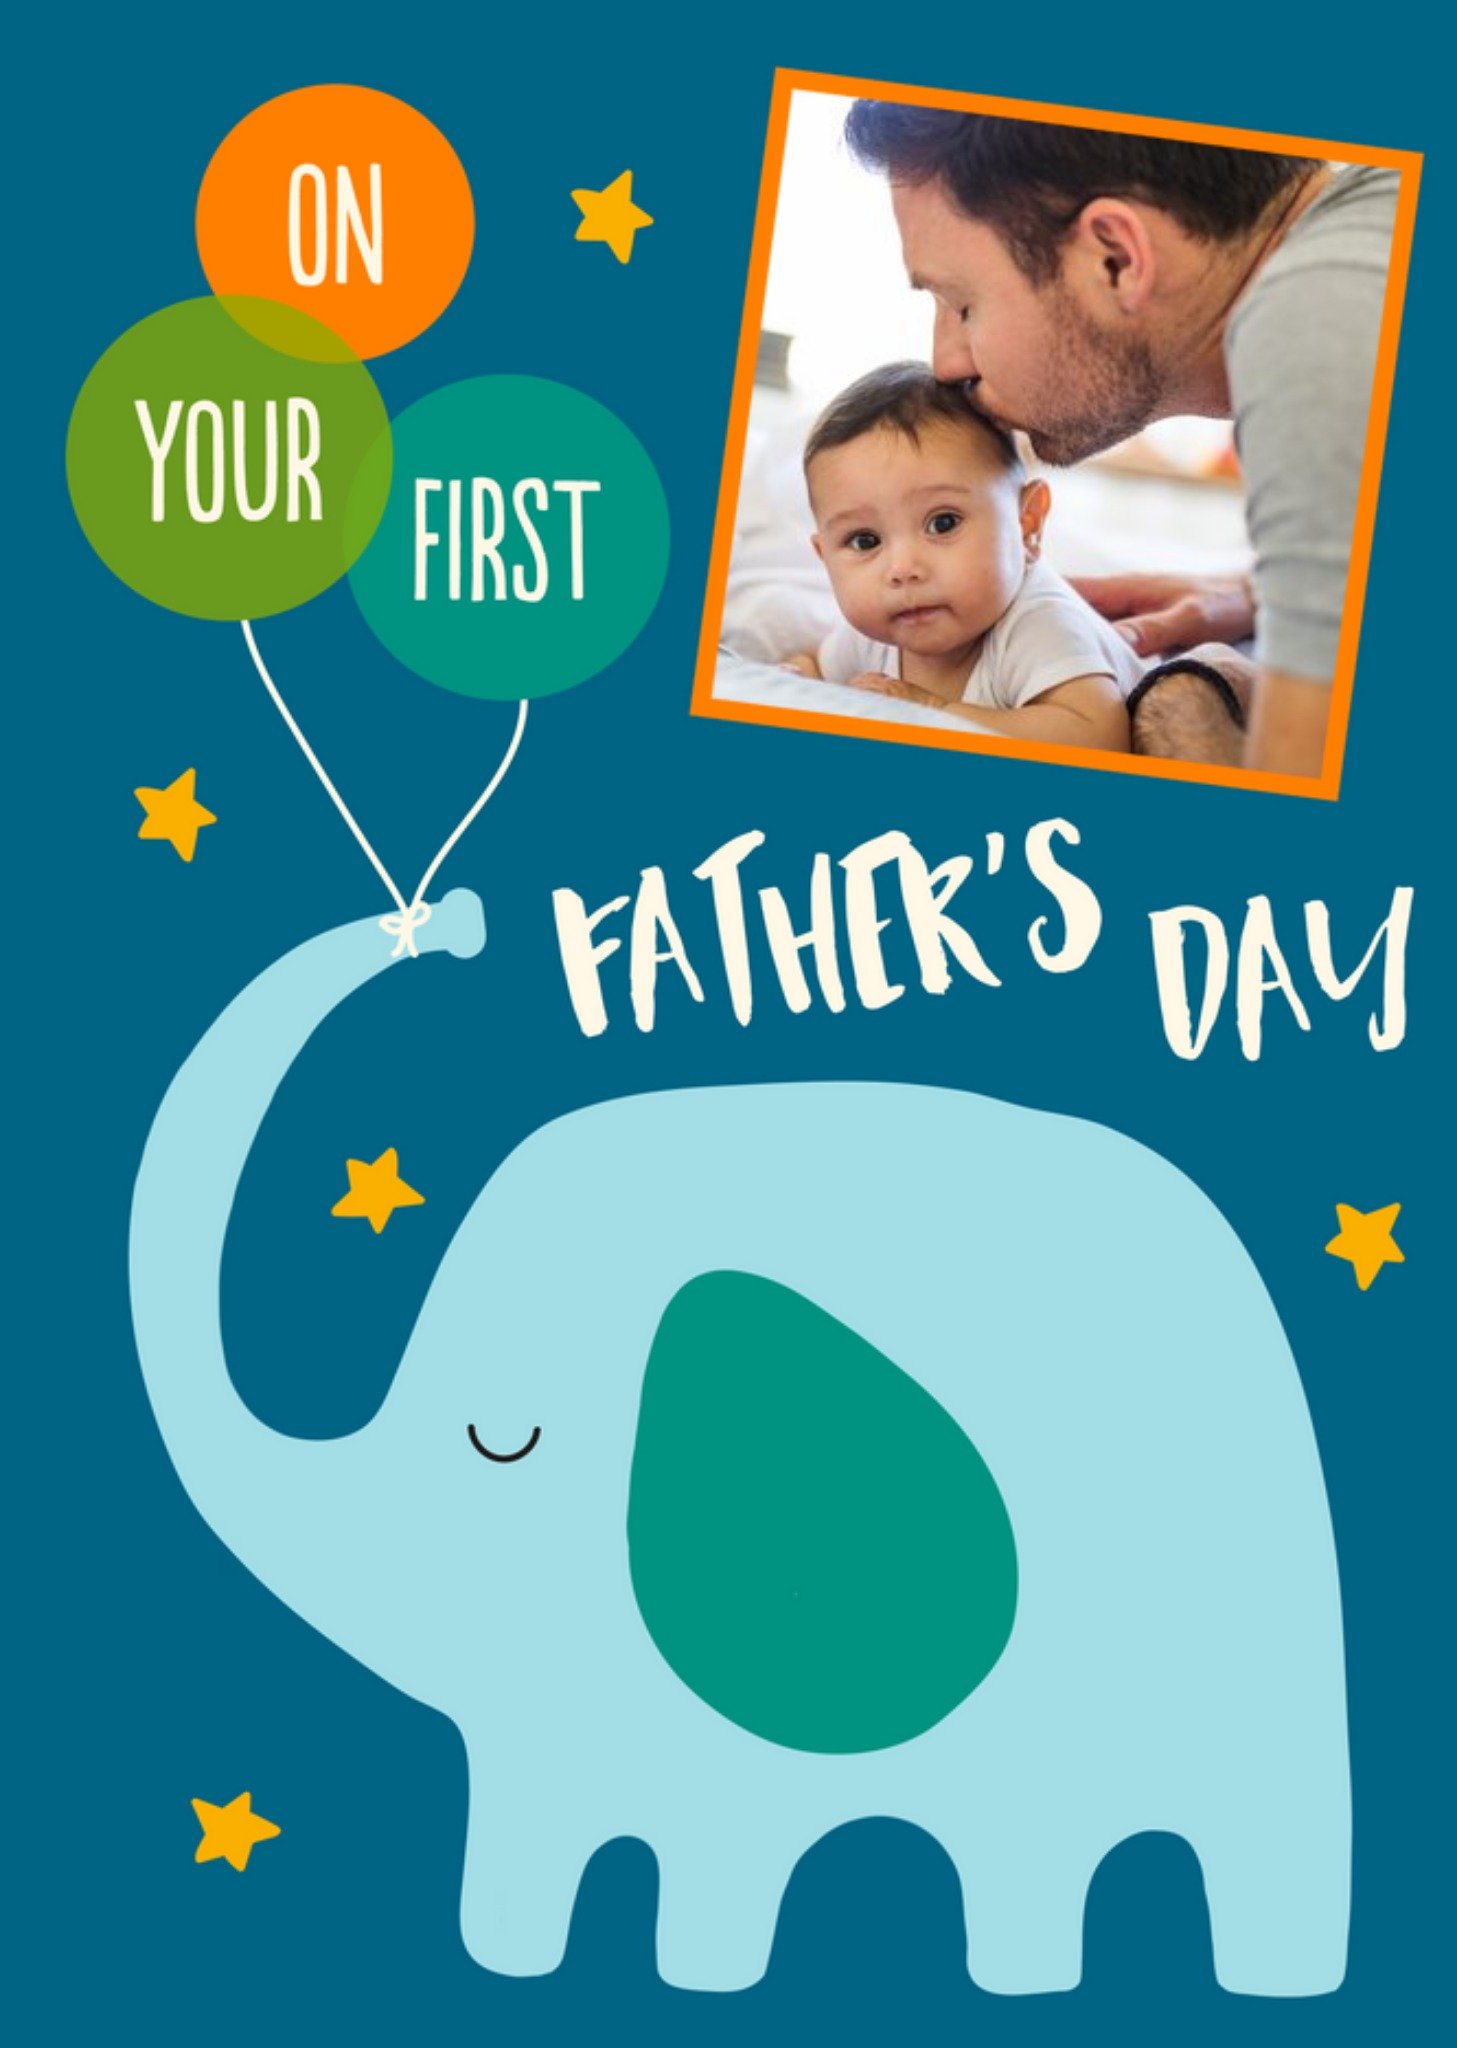 Moonpig Elephant With Balloons On Your First Fathers Day Photo Upload Card, Large